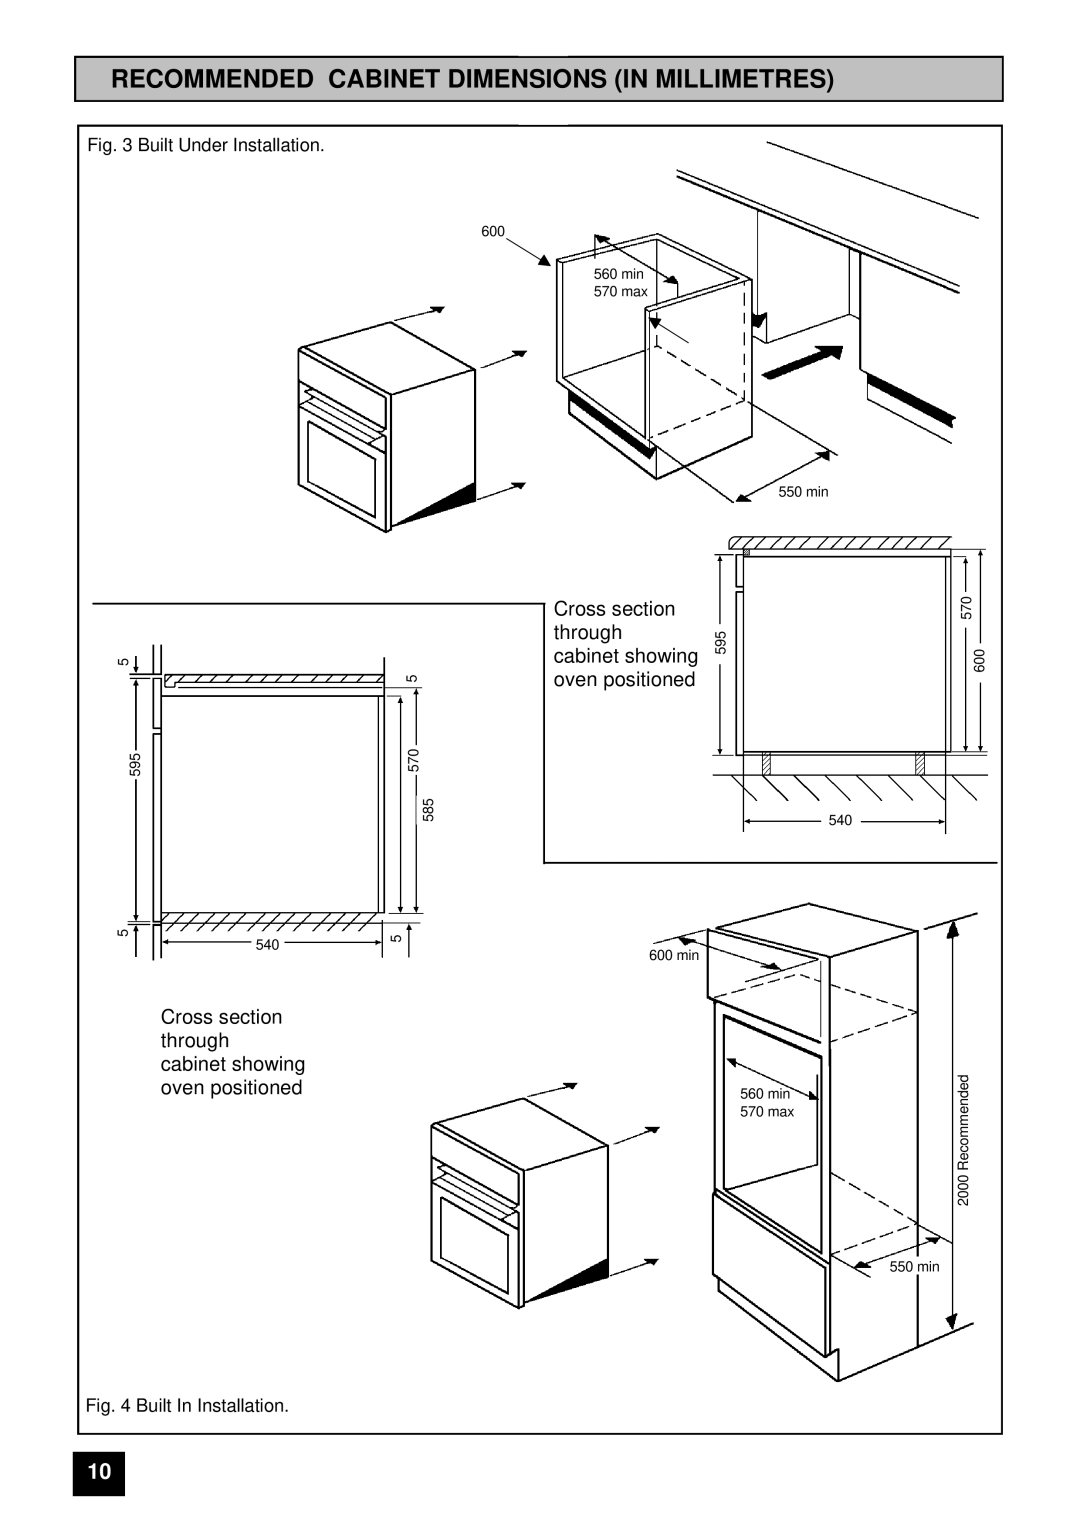 Tricity Bendix SURREY Recommended Cabinet Dimensions In Millimetres, Cross section, through, cabinet showing 